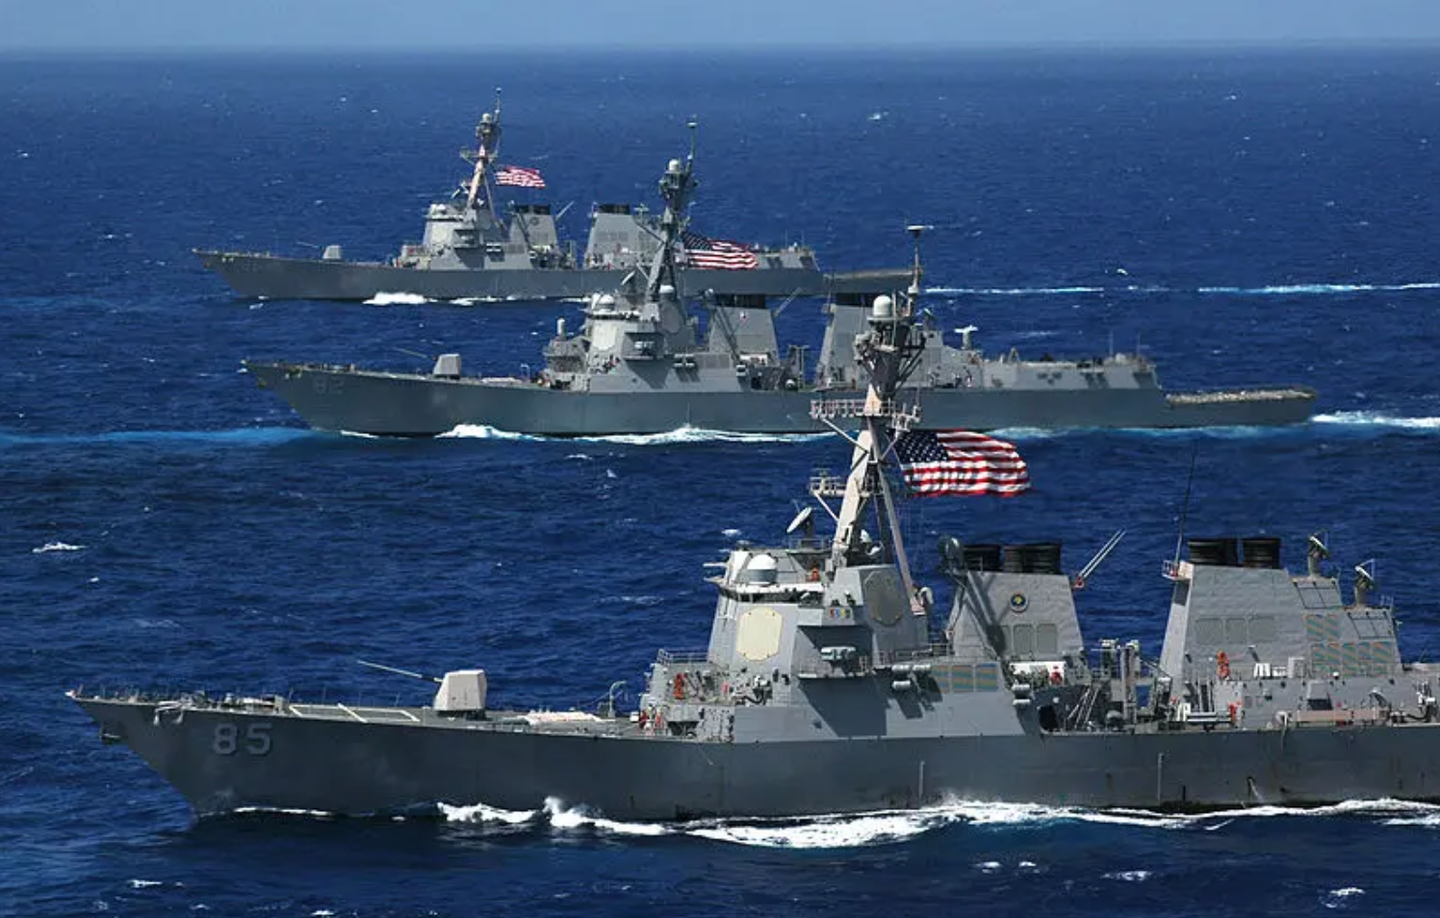 <em>Three Arleigh Burke-class guided-missile destroyers, the USS McCampbell (DDG 85), USS Lassen (DDG 82) and USS Shoup (DDG 86) steam in formation during a photo exercise. (U.S. Navy photo by Chief Photographer's Mate Todd P. Cichonowicz)</em>